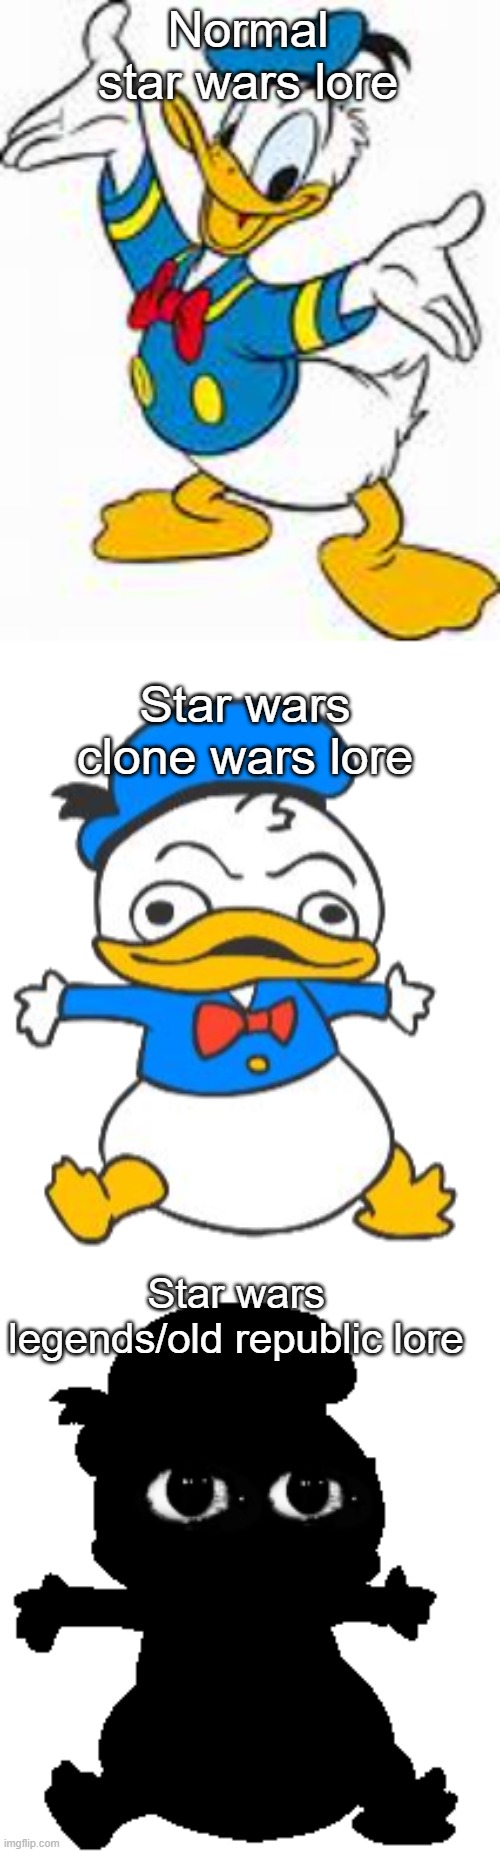 Yep, i'm still milking this donald duck template. Just like disney is milking star wars B) | Normal star wars lore; Star wars clone wars lore; Star wars legends/old republic lore | image tagged in donald duck,star wars | made w/ Imgflip meme maker